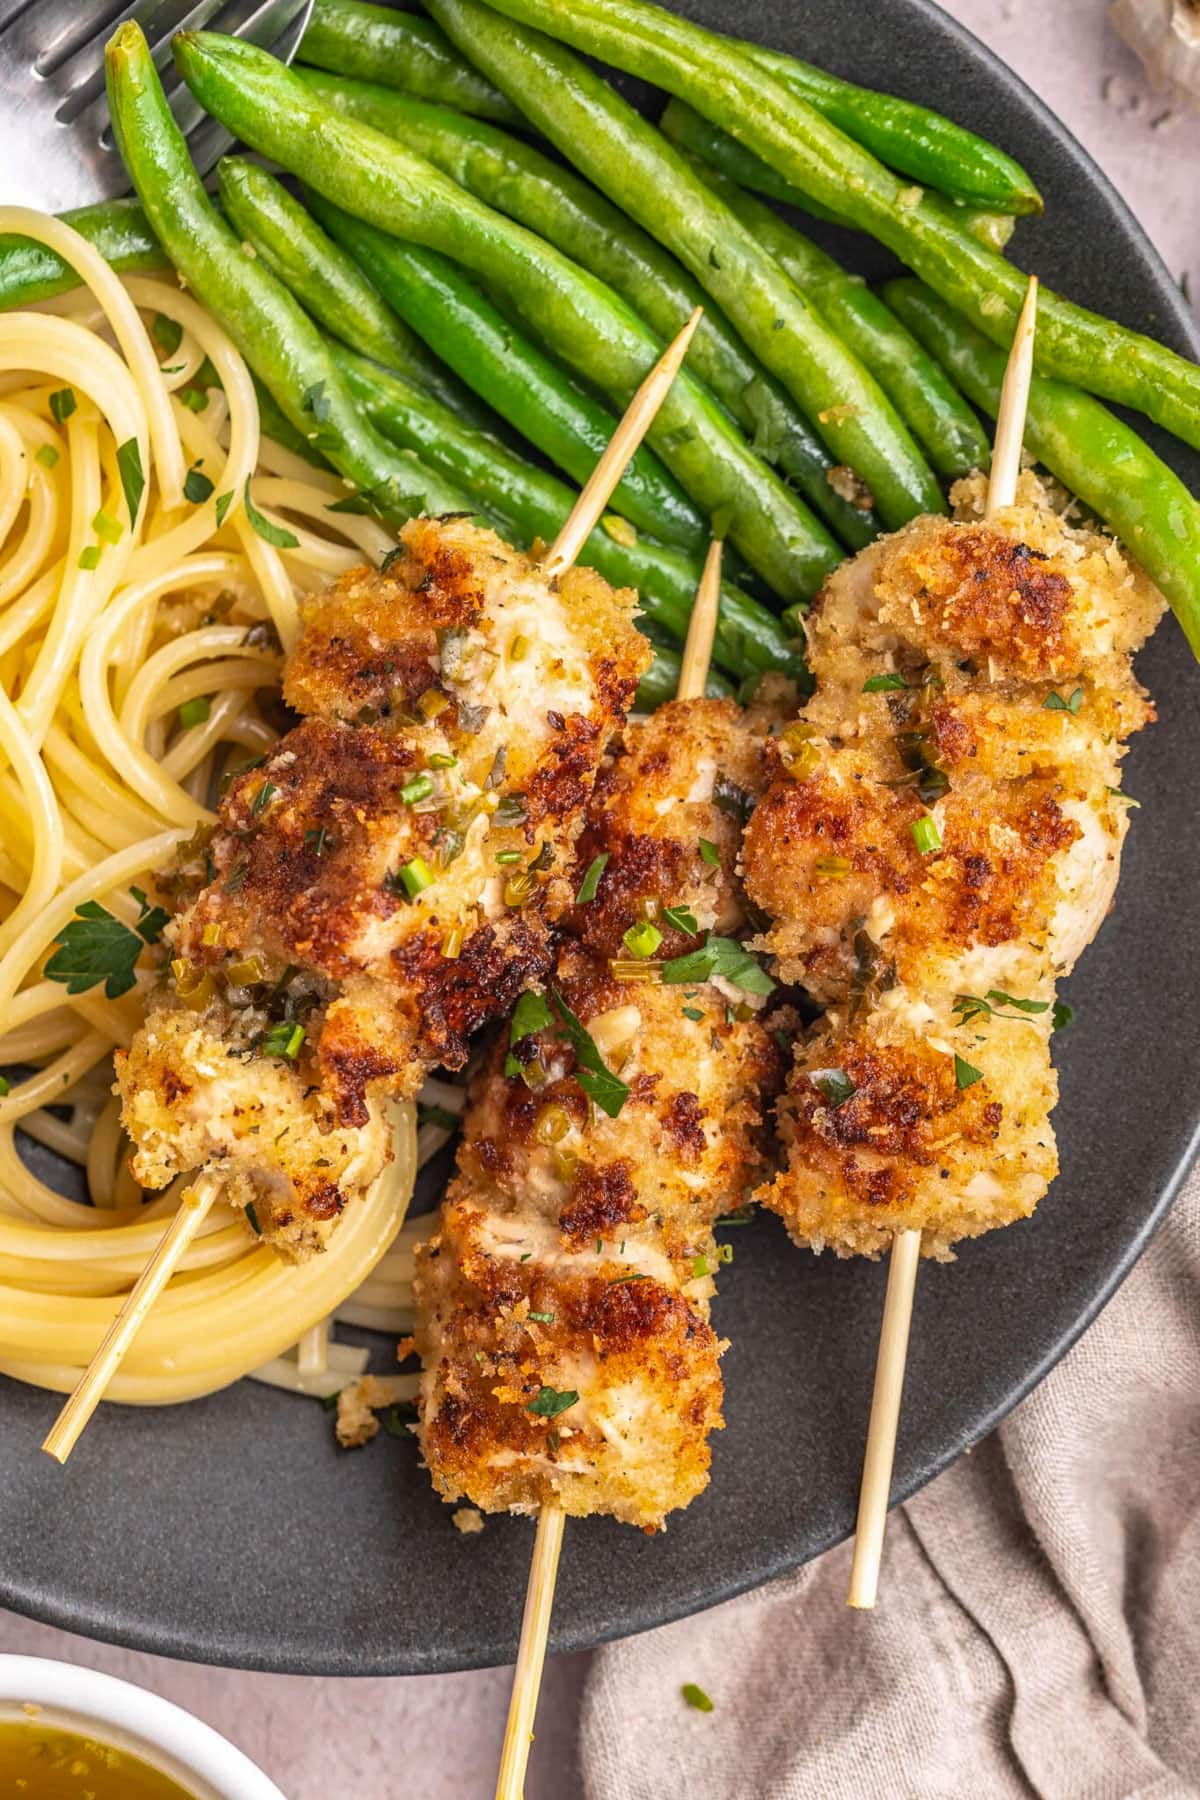 Skewered chicken spiedini on a grey plate with bright green asparagus and thin pasta.